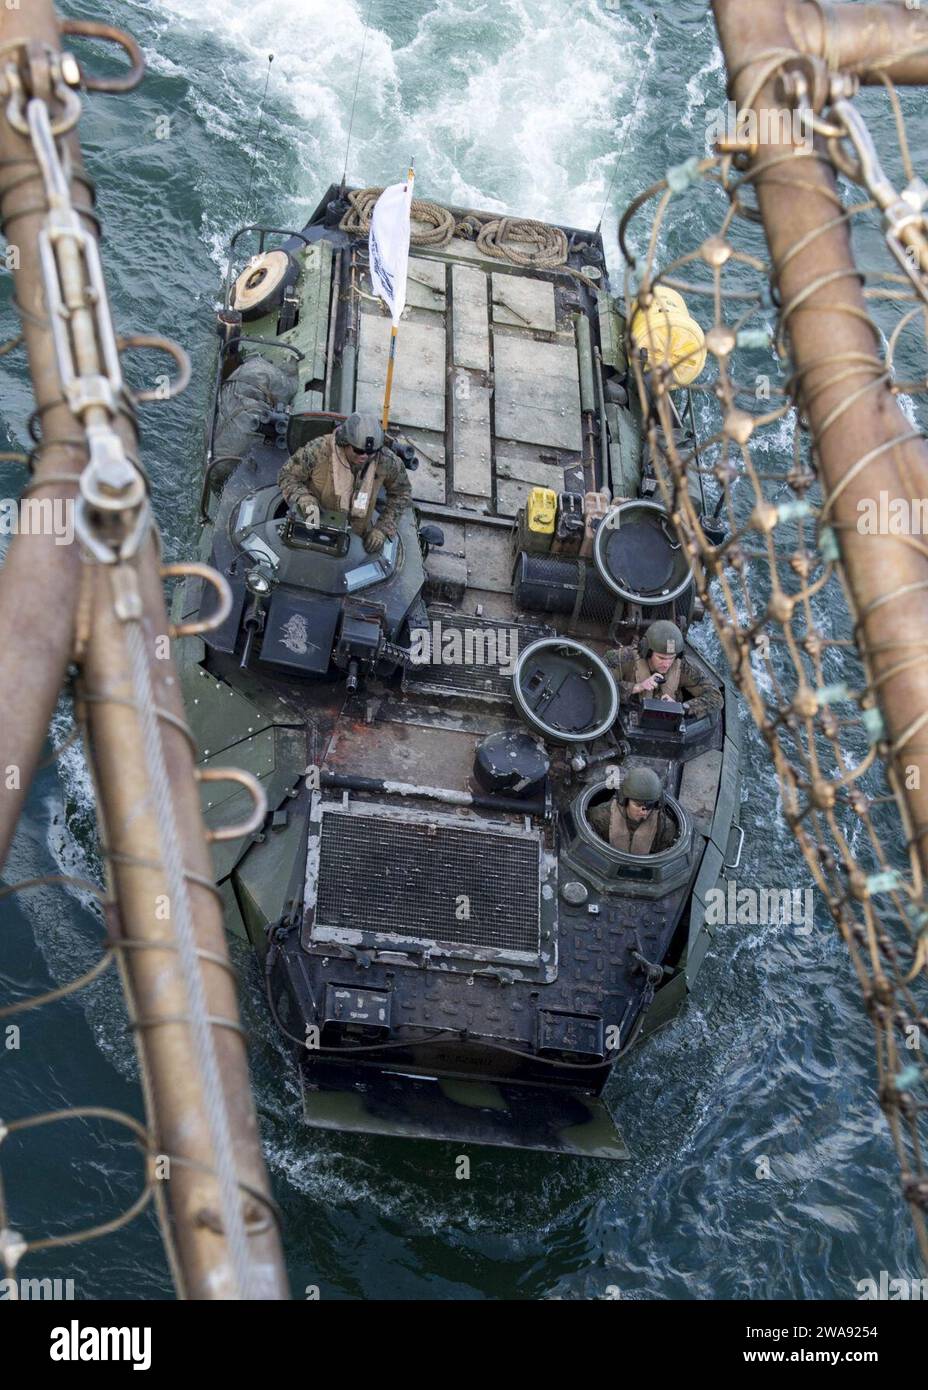 US military forces. 180315PC620-0188 BLACK SEA (March 15, 2018) An AAV-P7/A1 assault amphibious vehicle, attached to the 26th Marine Expeditionary Unit, embarks the well deck of the Harpers Ferry-class dock landing ship USS Oak Hill (LSD 51) following exercise Spring Storm 2018, March 15. Spring Storm is a Romanian-led exercise in the Black Sea to enhance amphibious operations and staff interoperability between Romanian and U.S. naval forces. Oak Hill, home-ported in Virginia Beach, Virginia, is conducting naval operations in the U.S. 6th Fleet area of operations. (U.S. Navy photo by Mass Comm Stock Photo